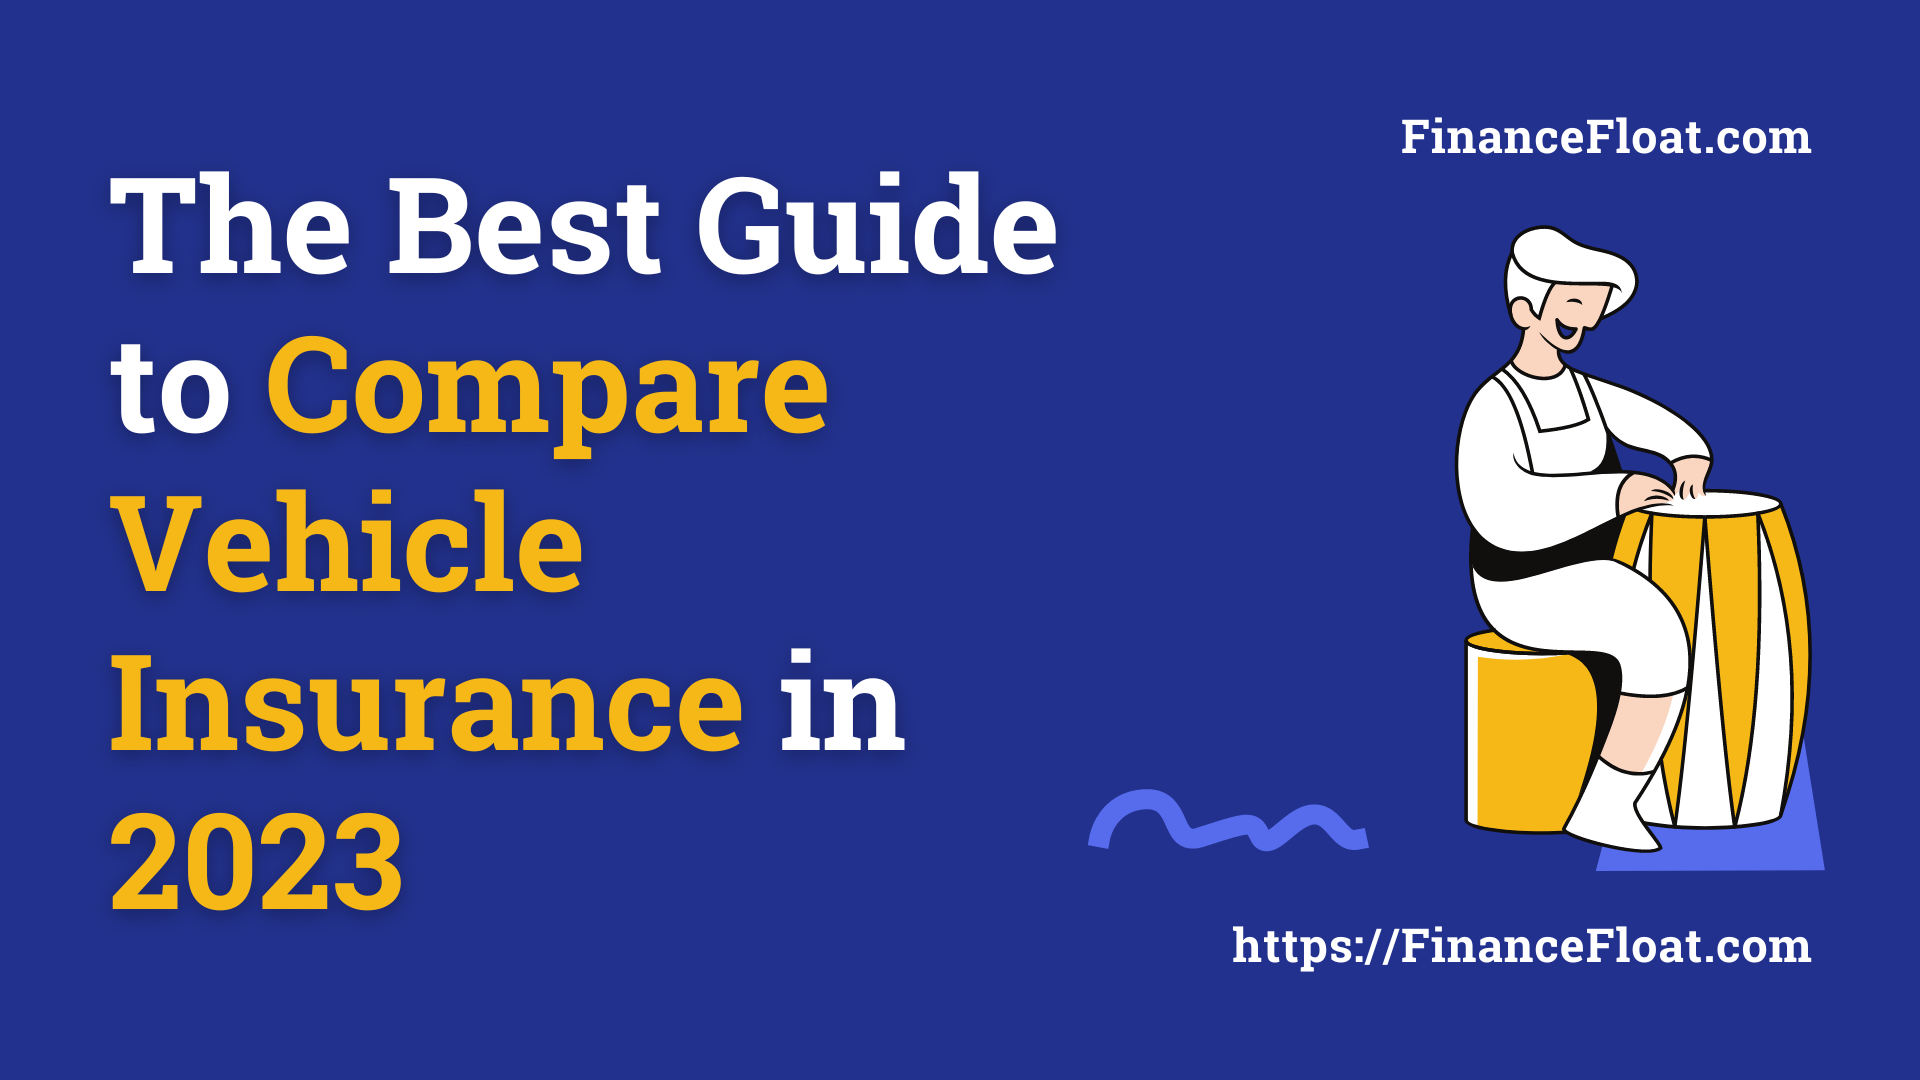 The Best Guide to Compare Vehicle Insurance in 2023